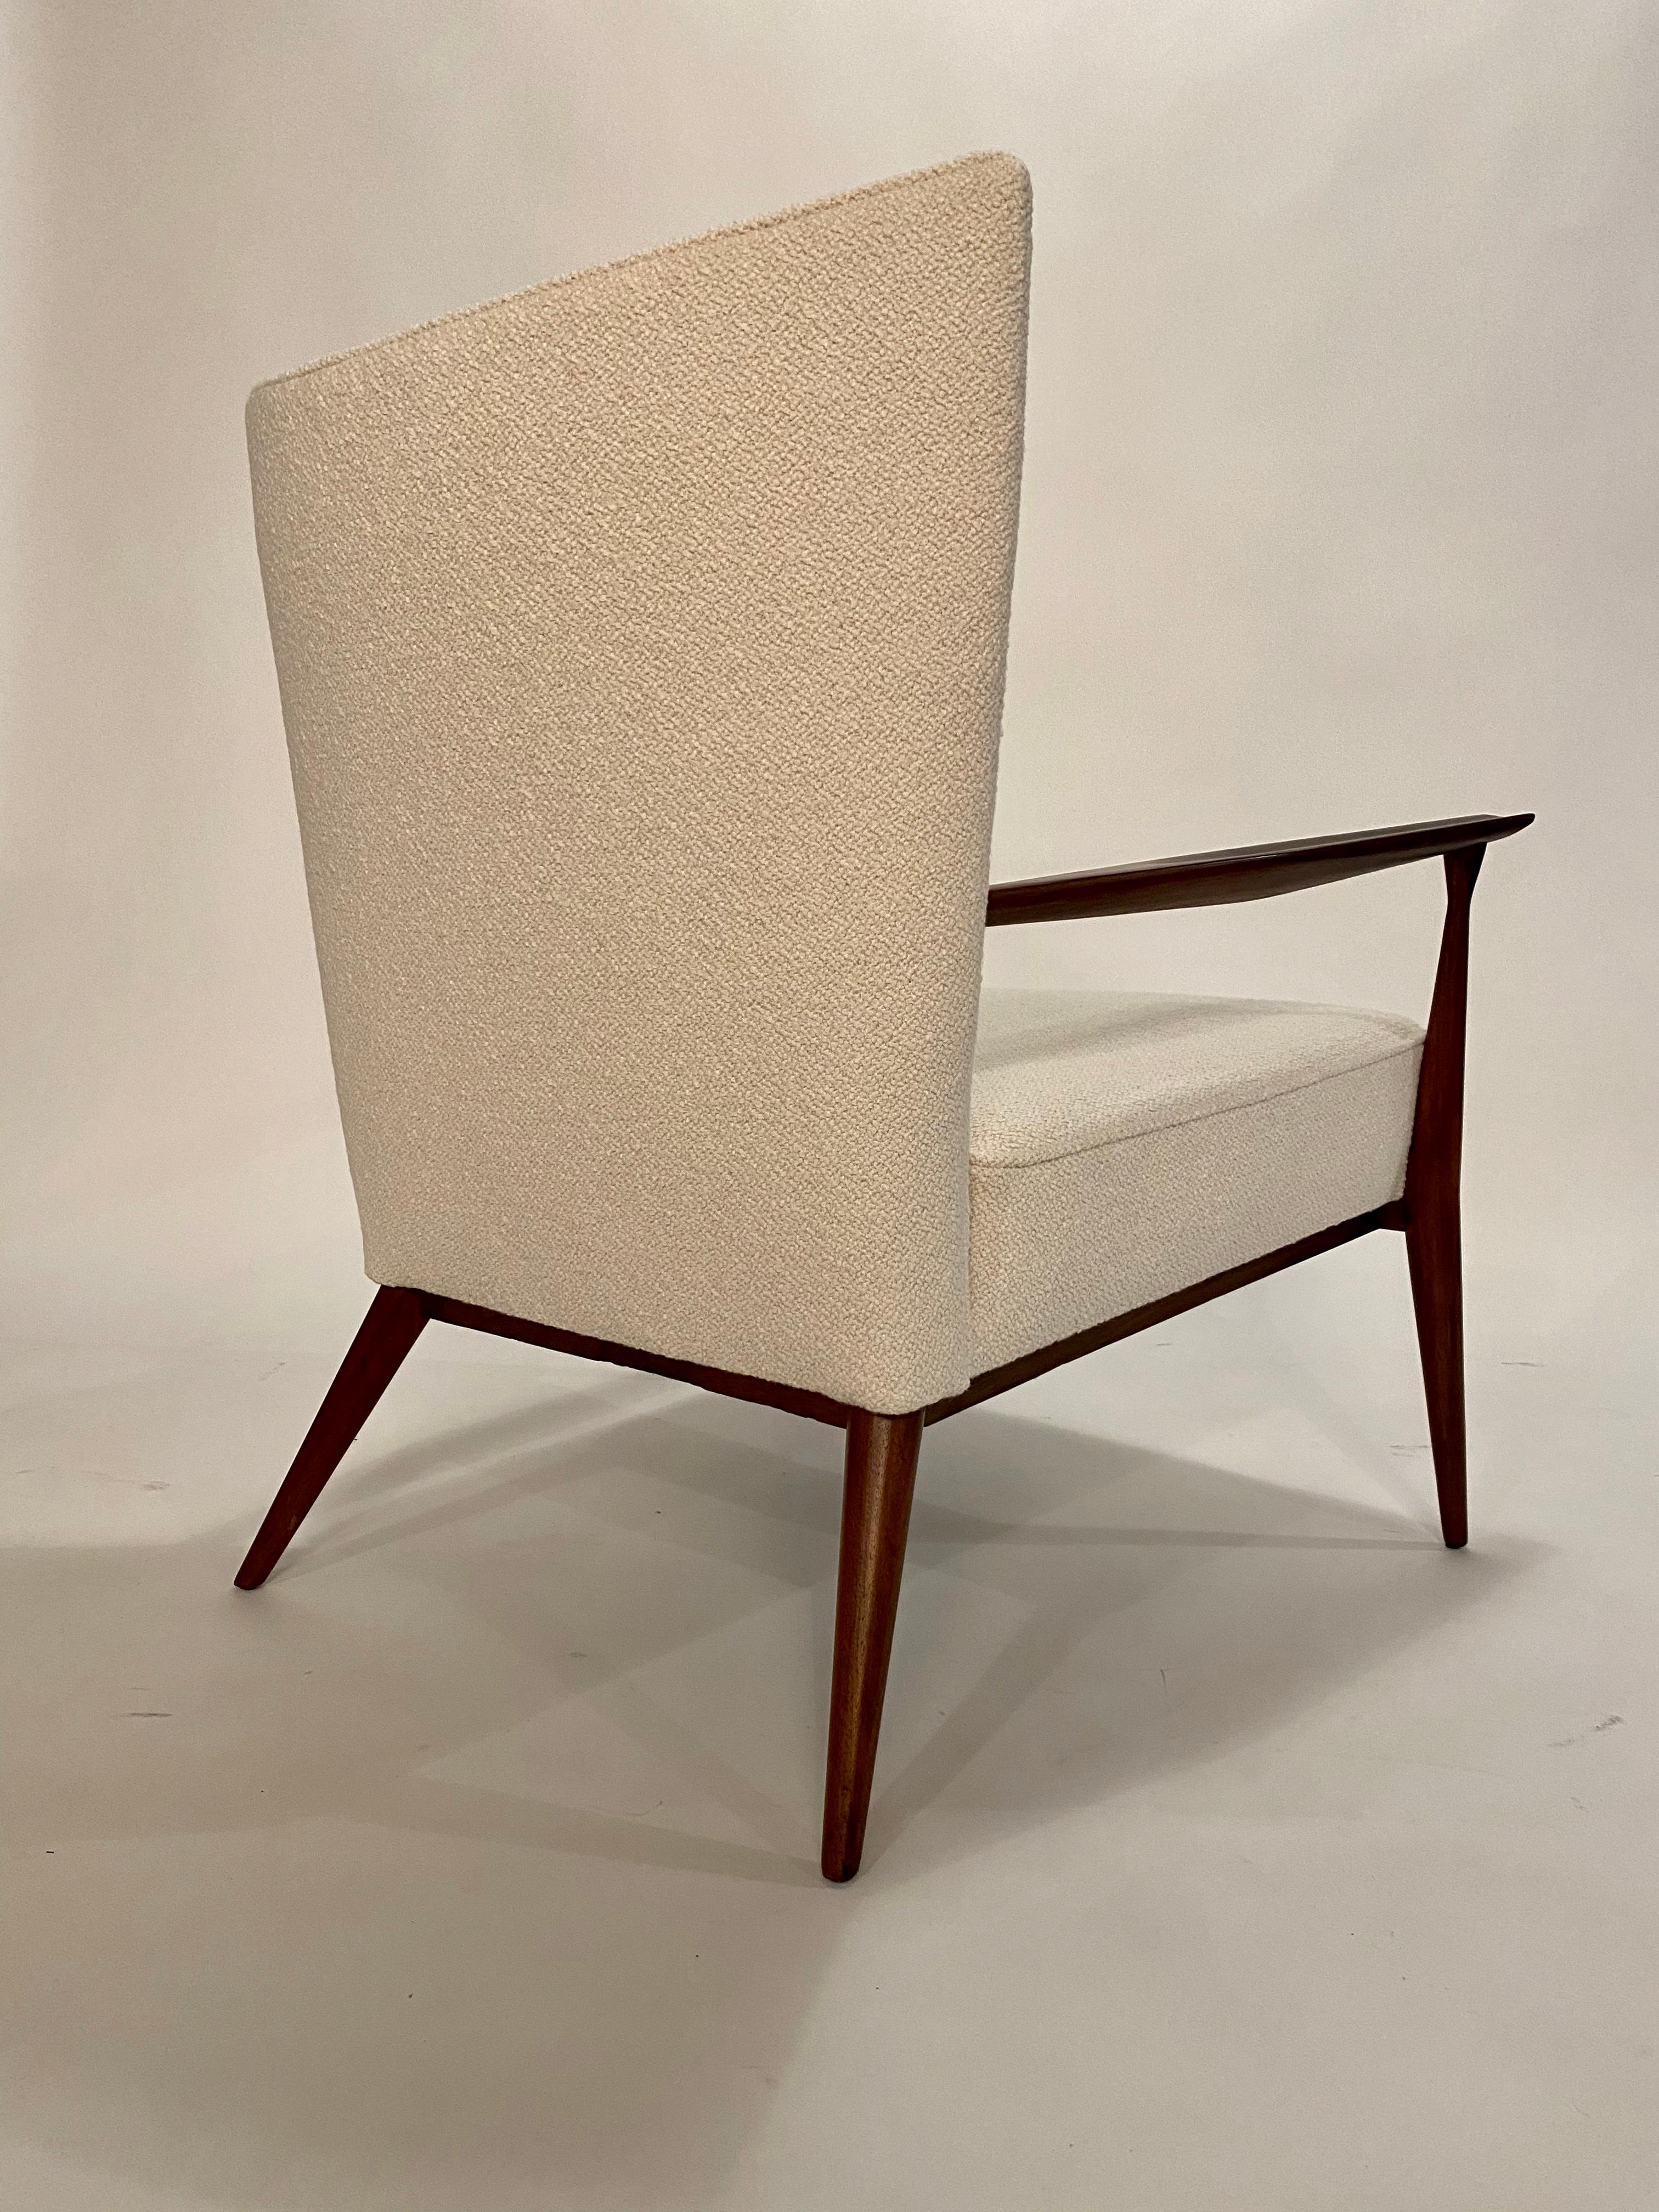 Paul McCobb Lounge Chair In Excellent Condition For Sale In Chicago, IL